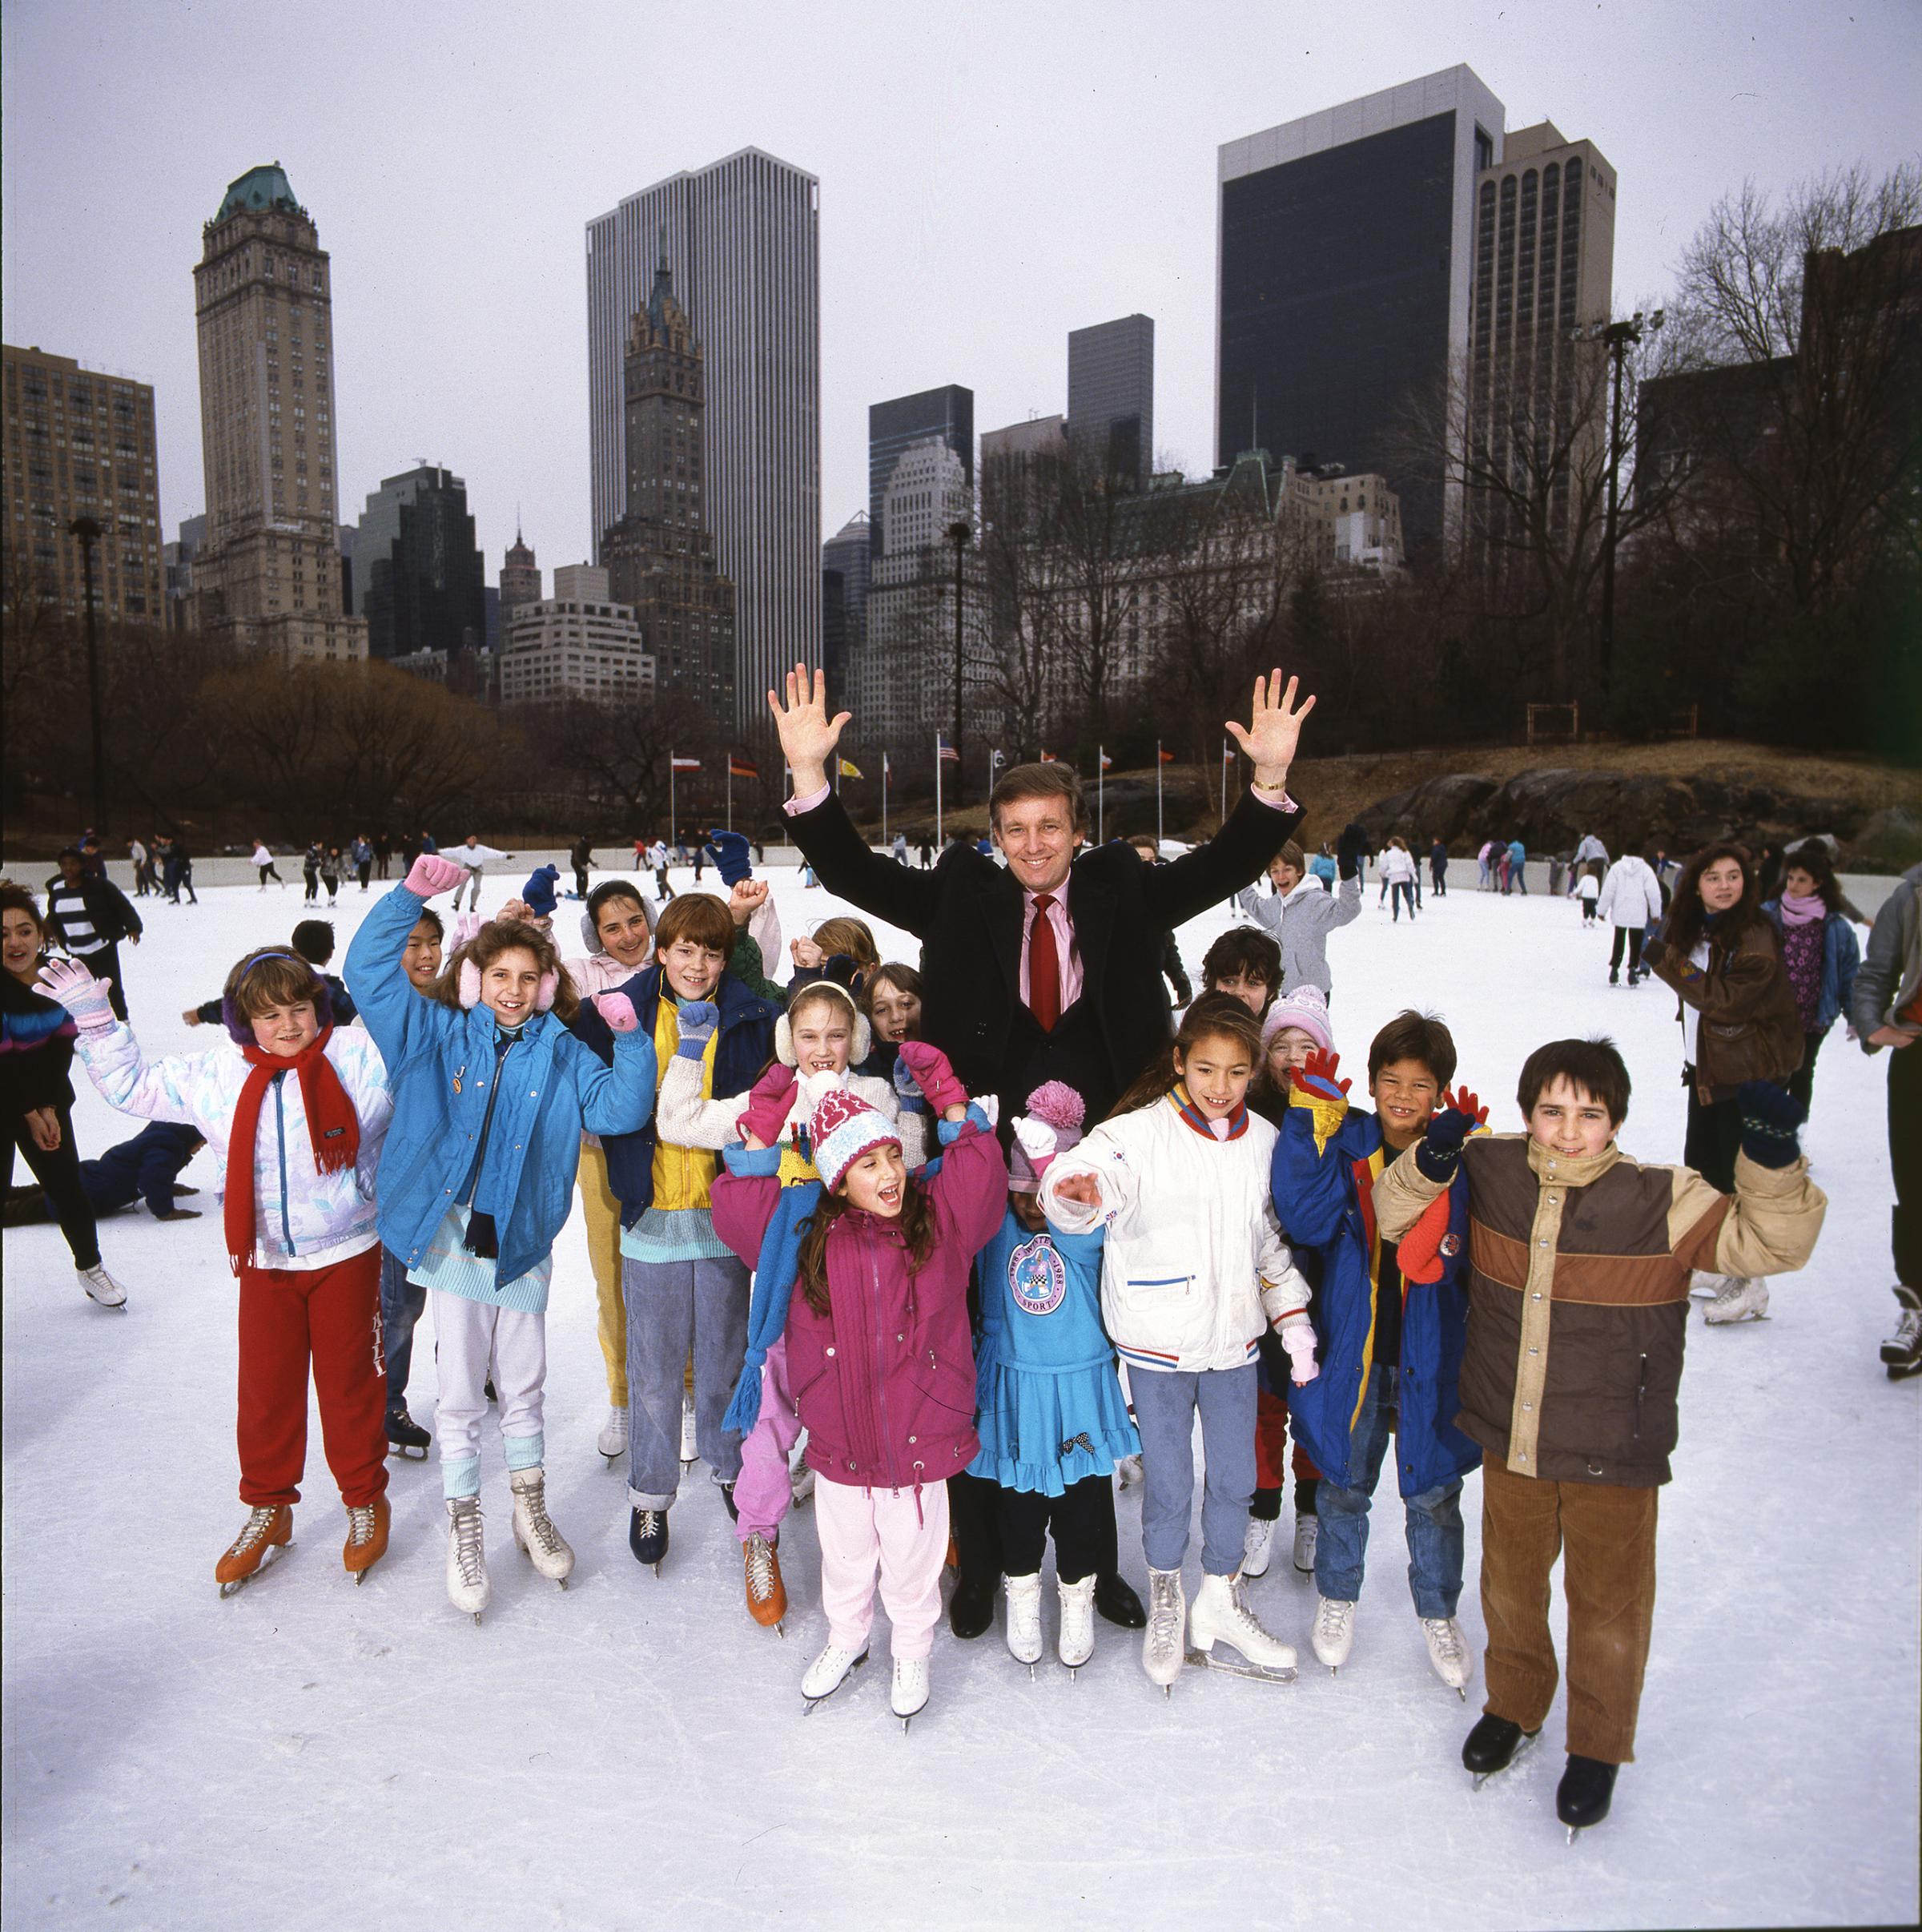 1986 Trump celebrates after the completion of repairs to Wollman Rink in Central Park. He got the contract from the city, finishing early and well under budget.